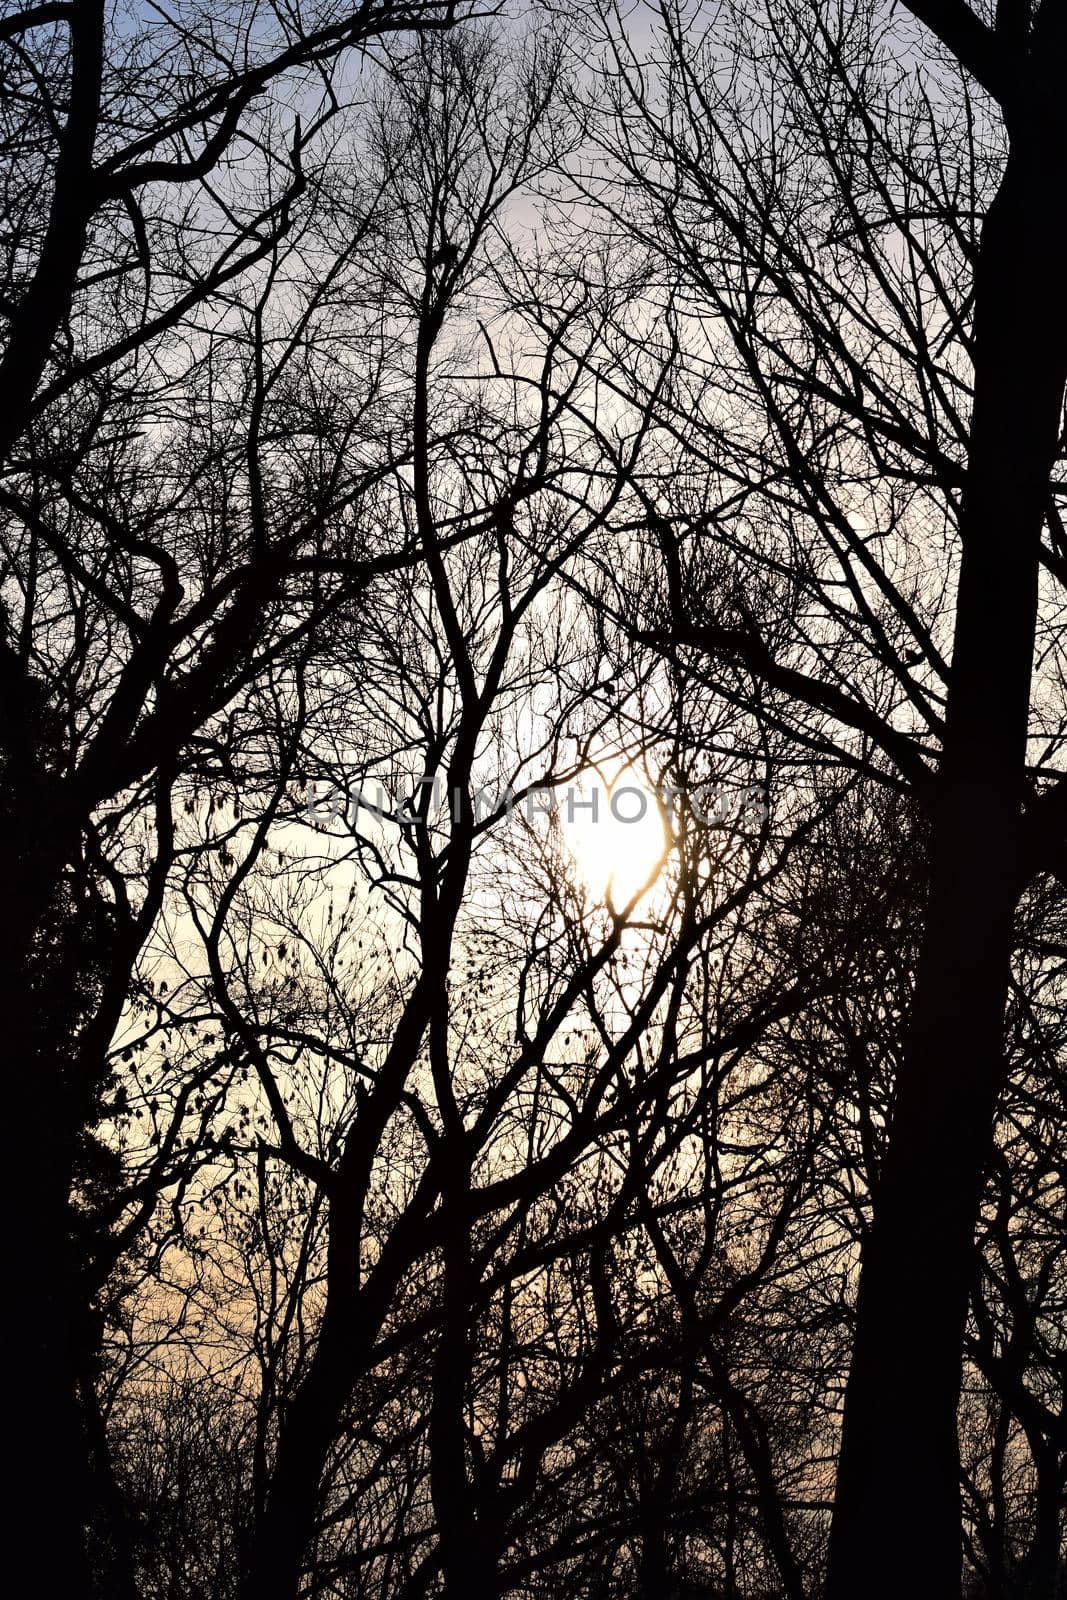 Trees and bushes in winter backlit by a sunset by Luise123